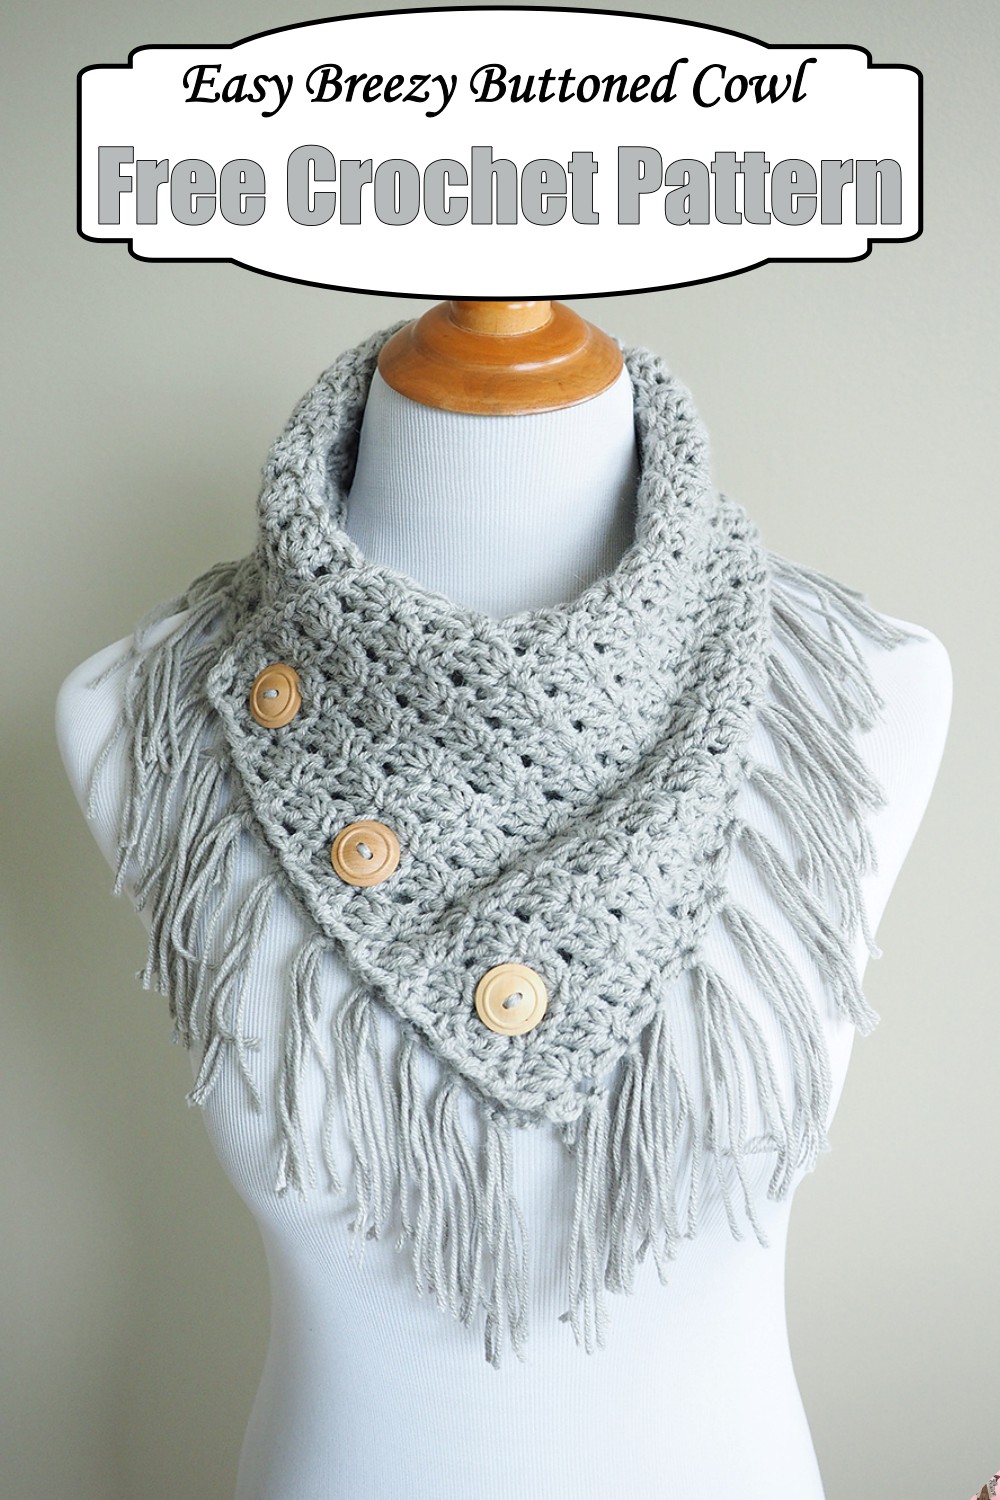 Easy Breezy Buttoned Cowl